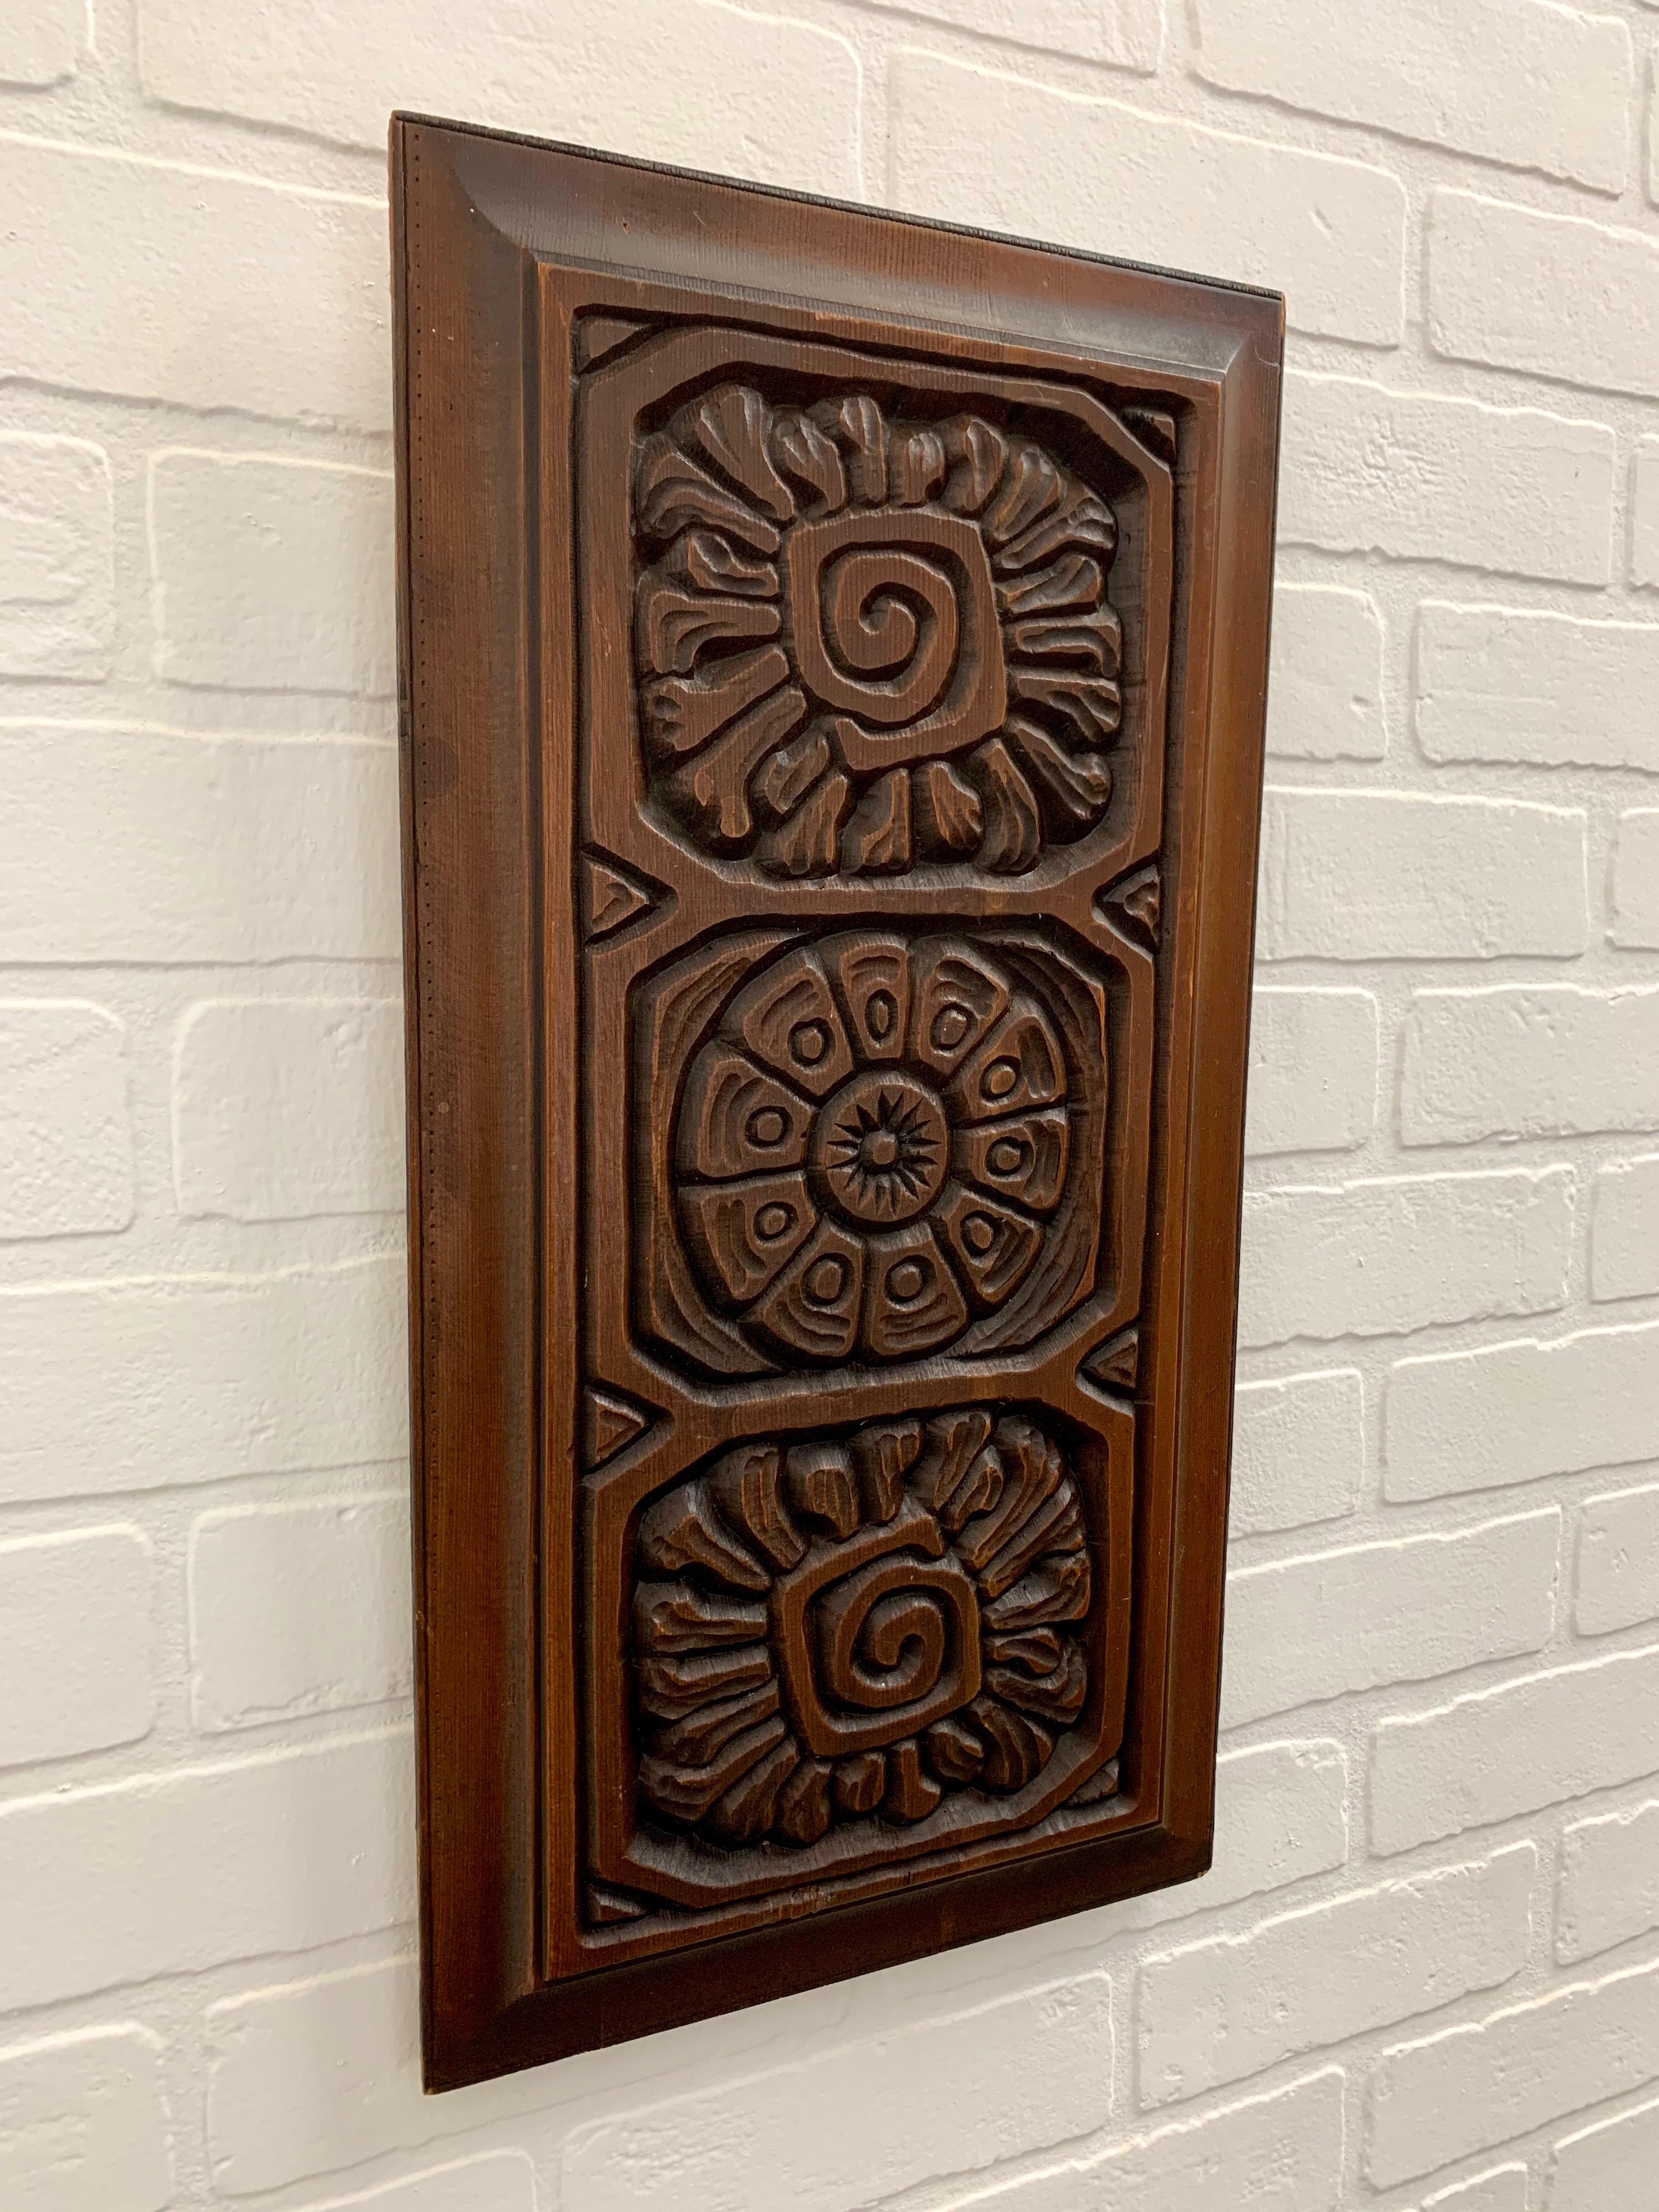 Redwood panel carved in the style of Panelcarve.